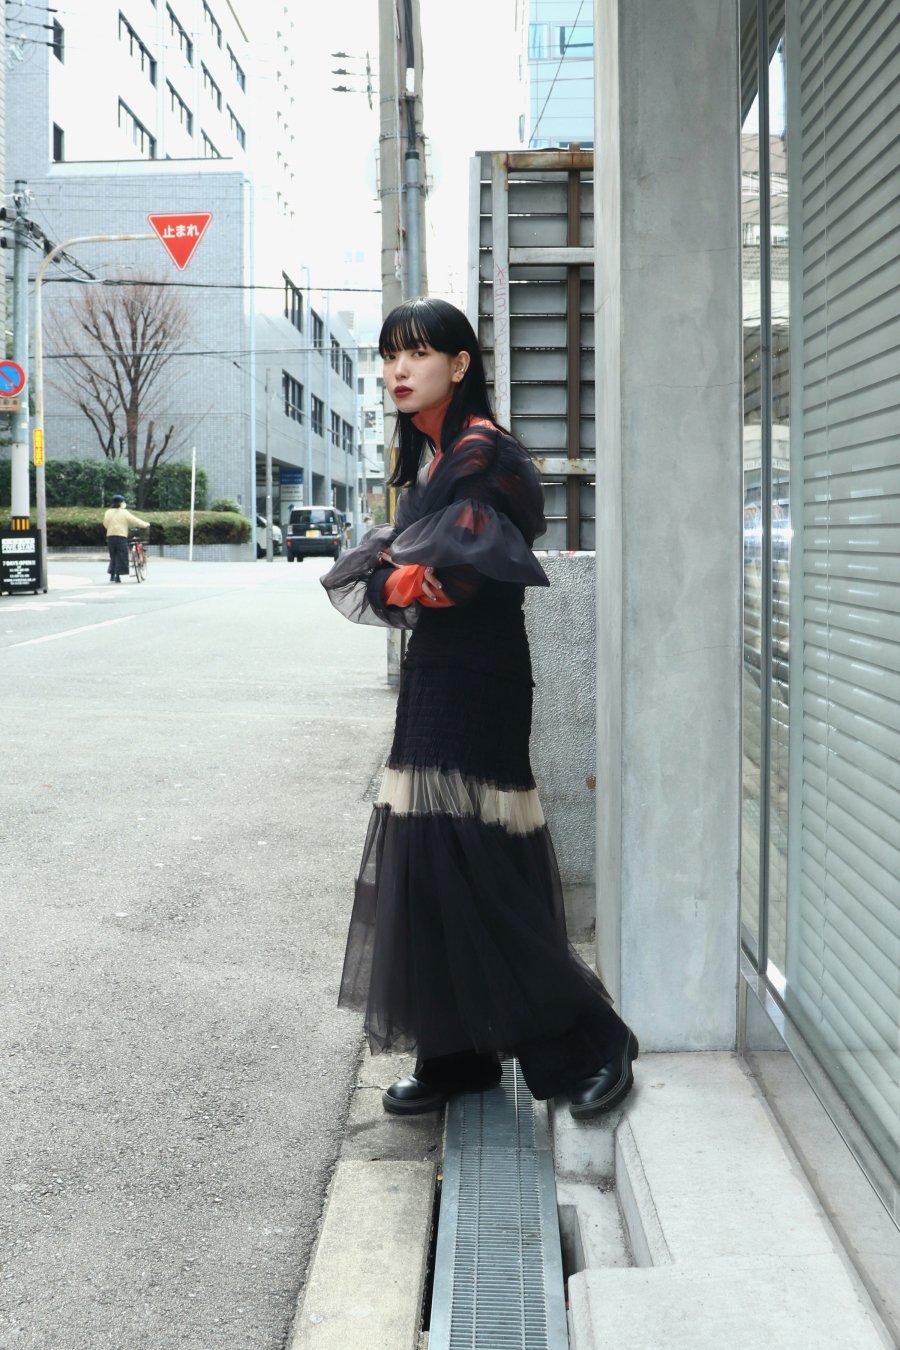 FETICO（フェティコ）のMUTTON SLEEVE TULLE BLOUSE BLACKの通販サイト